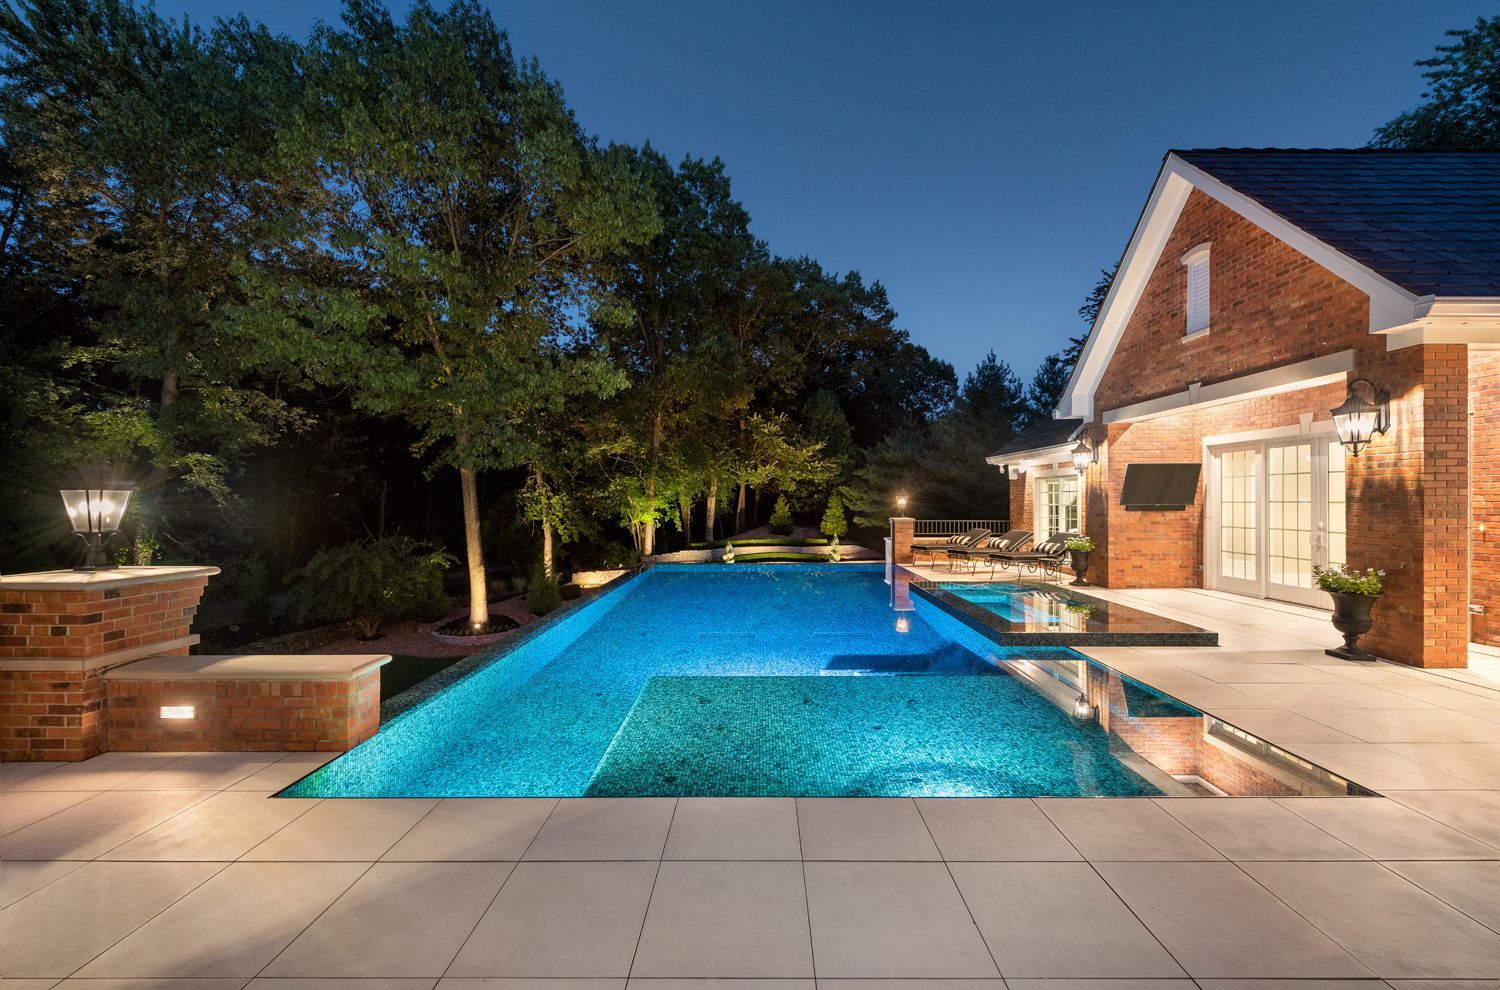 a large swimming pool in front of a brick house at night .